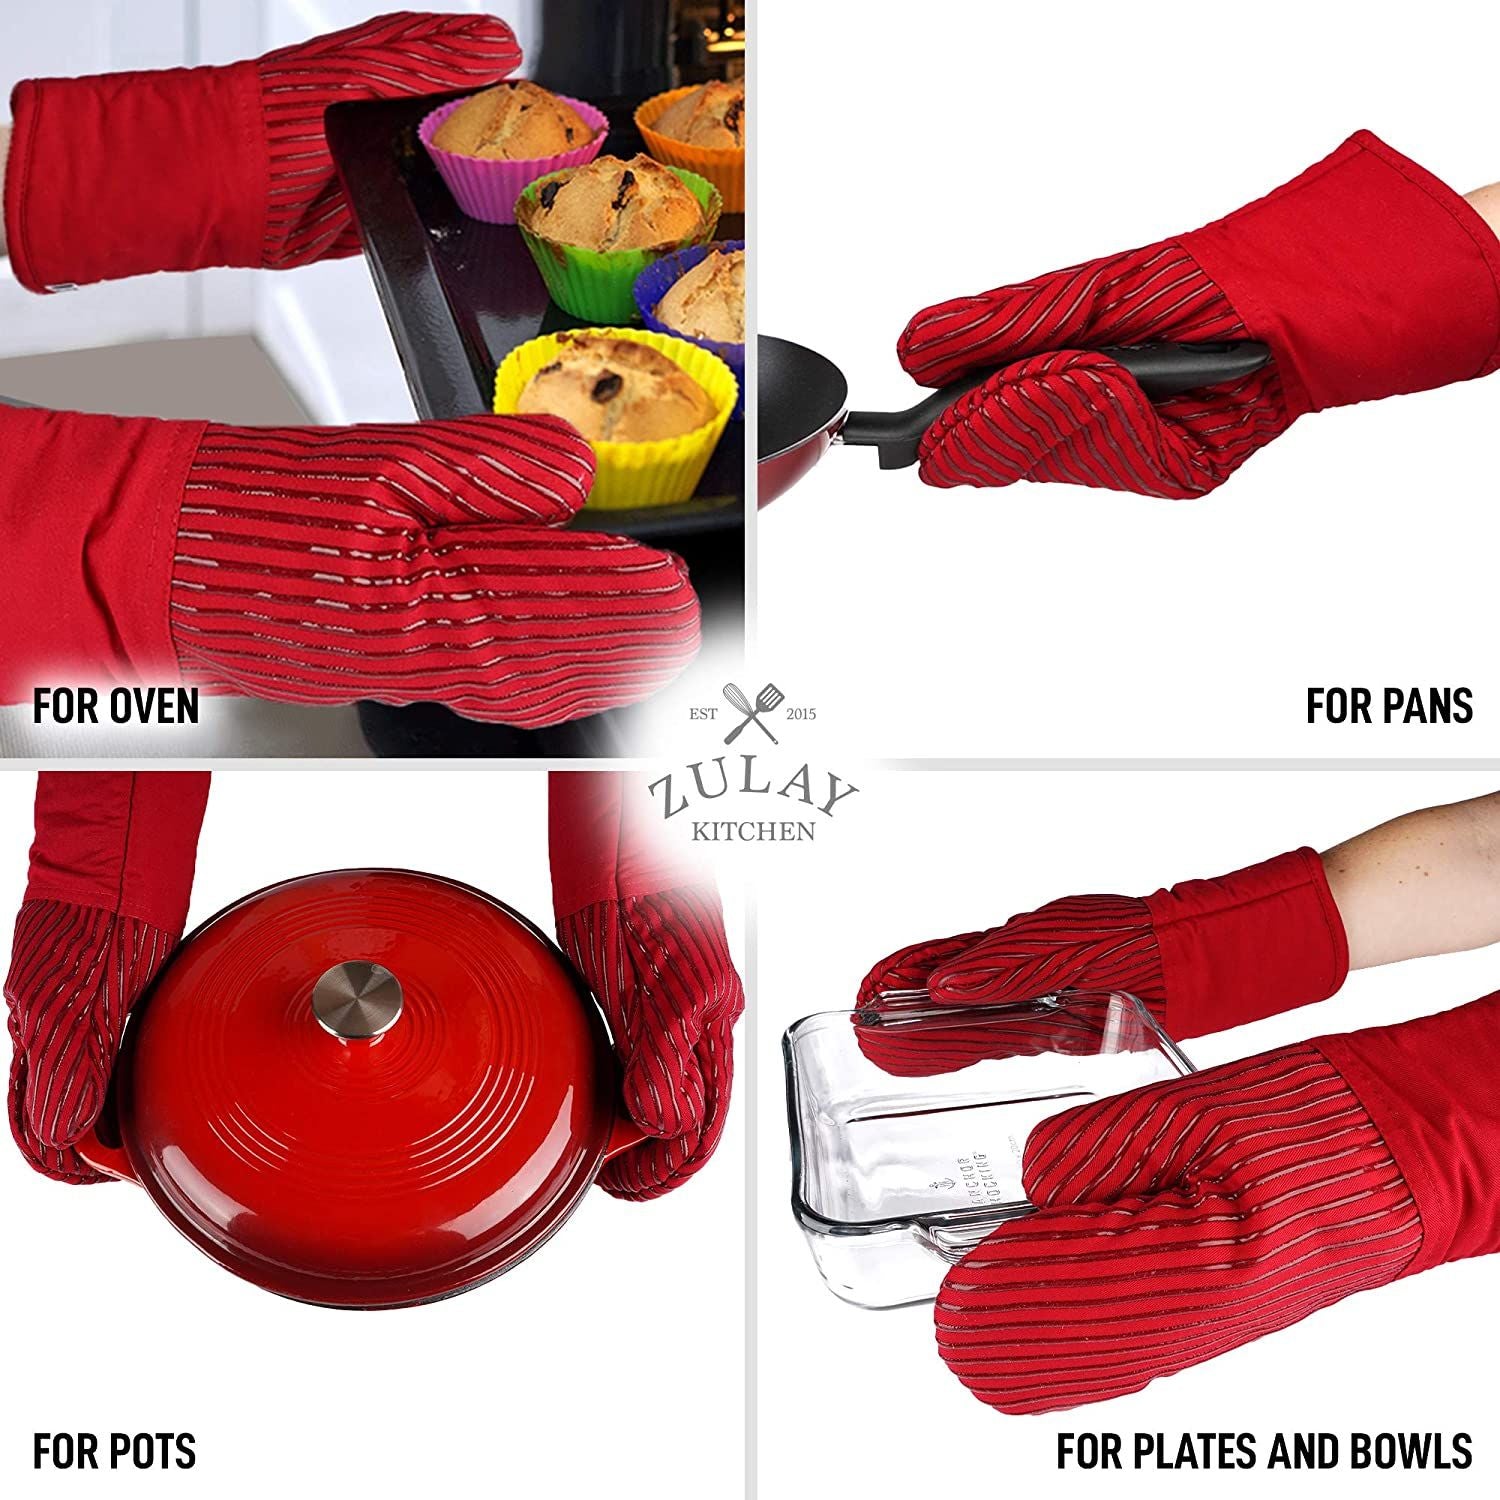 Zulay Kitchen Extra Long Silicone Oven Mitts - Red